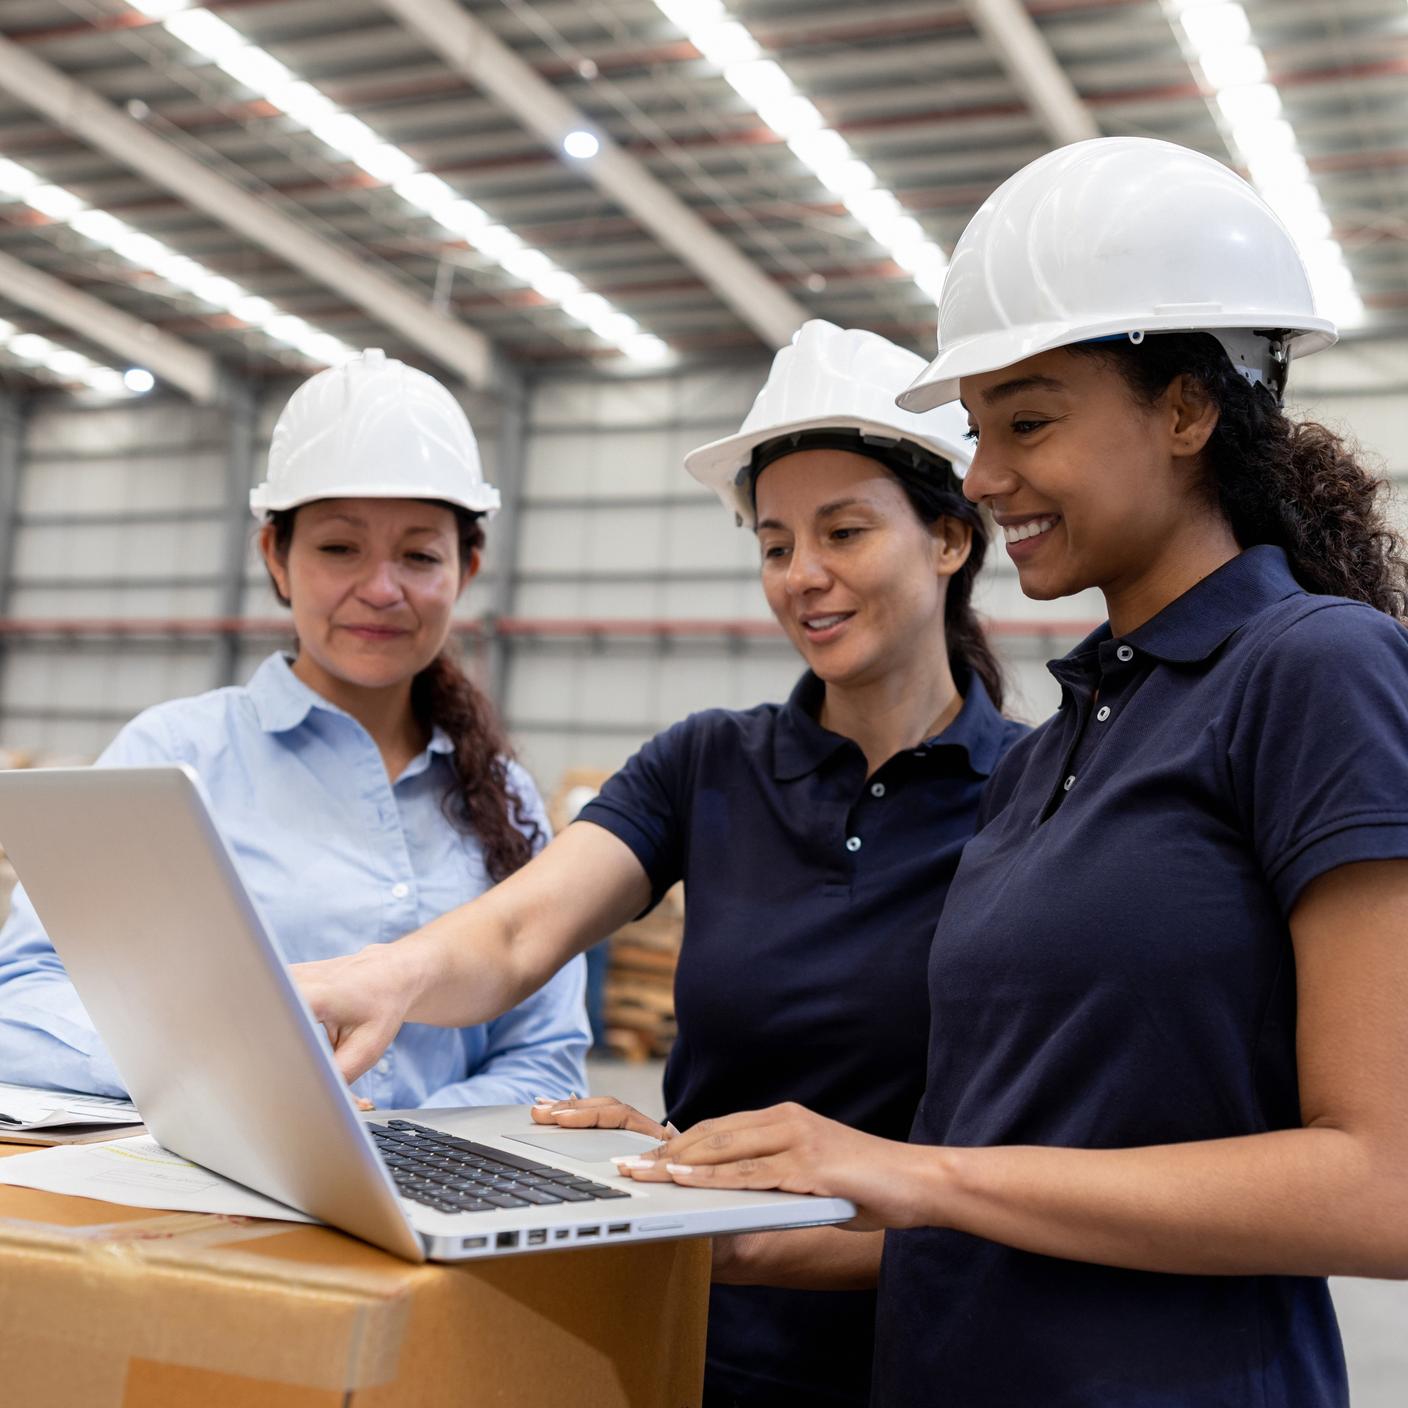 Team of women working at a distribution warehouse 